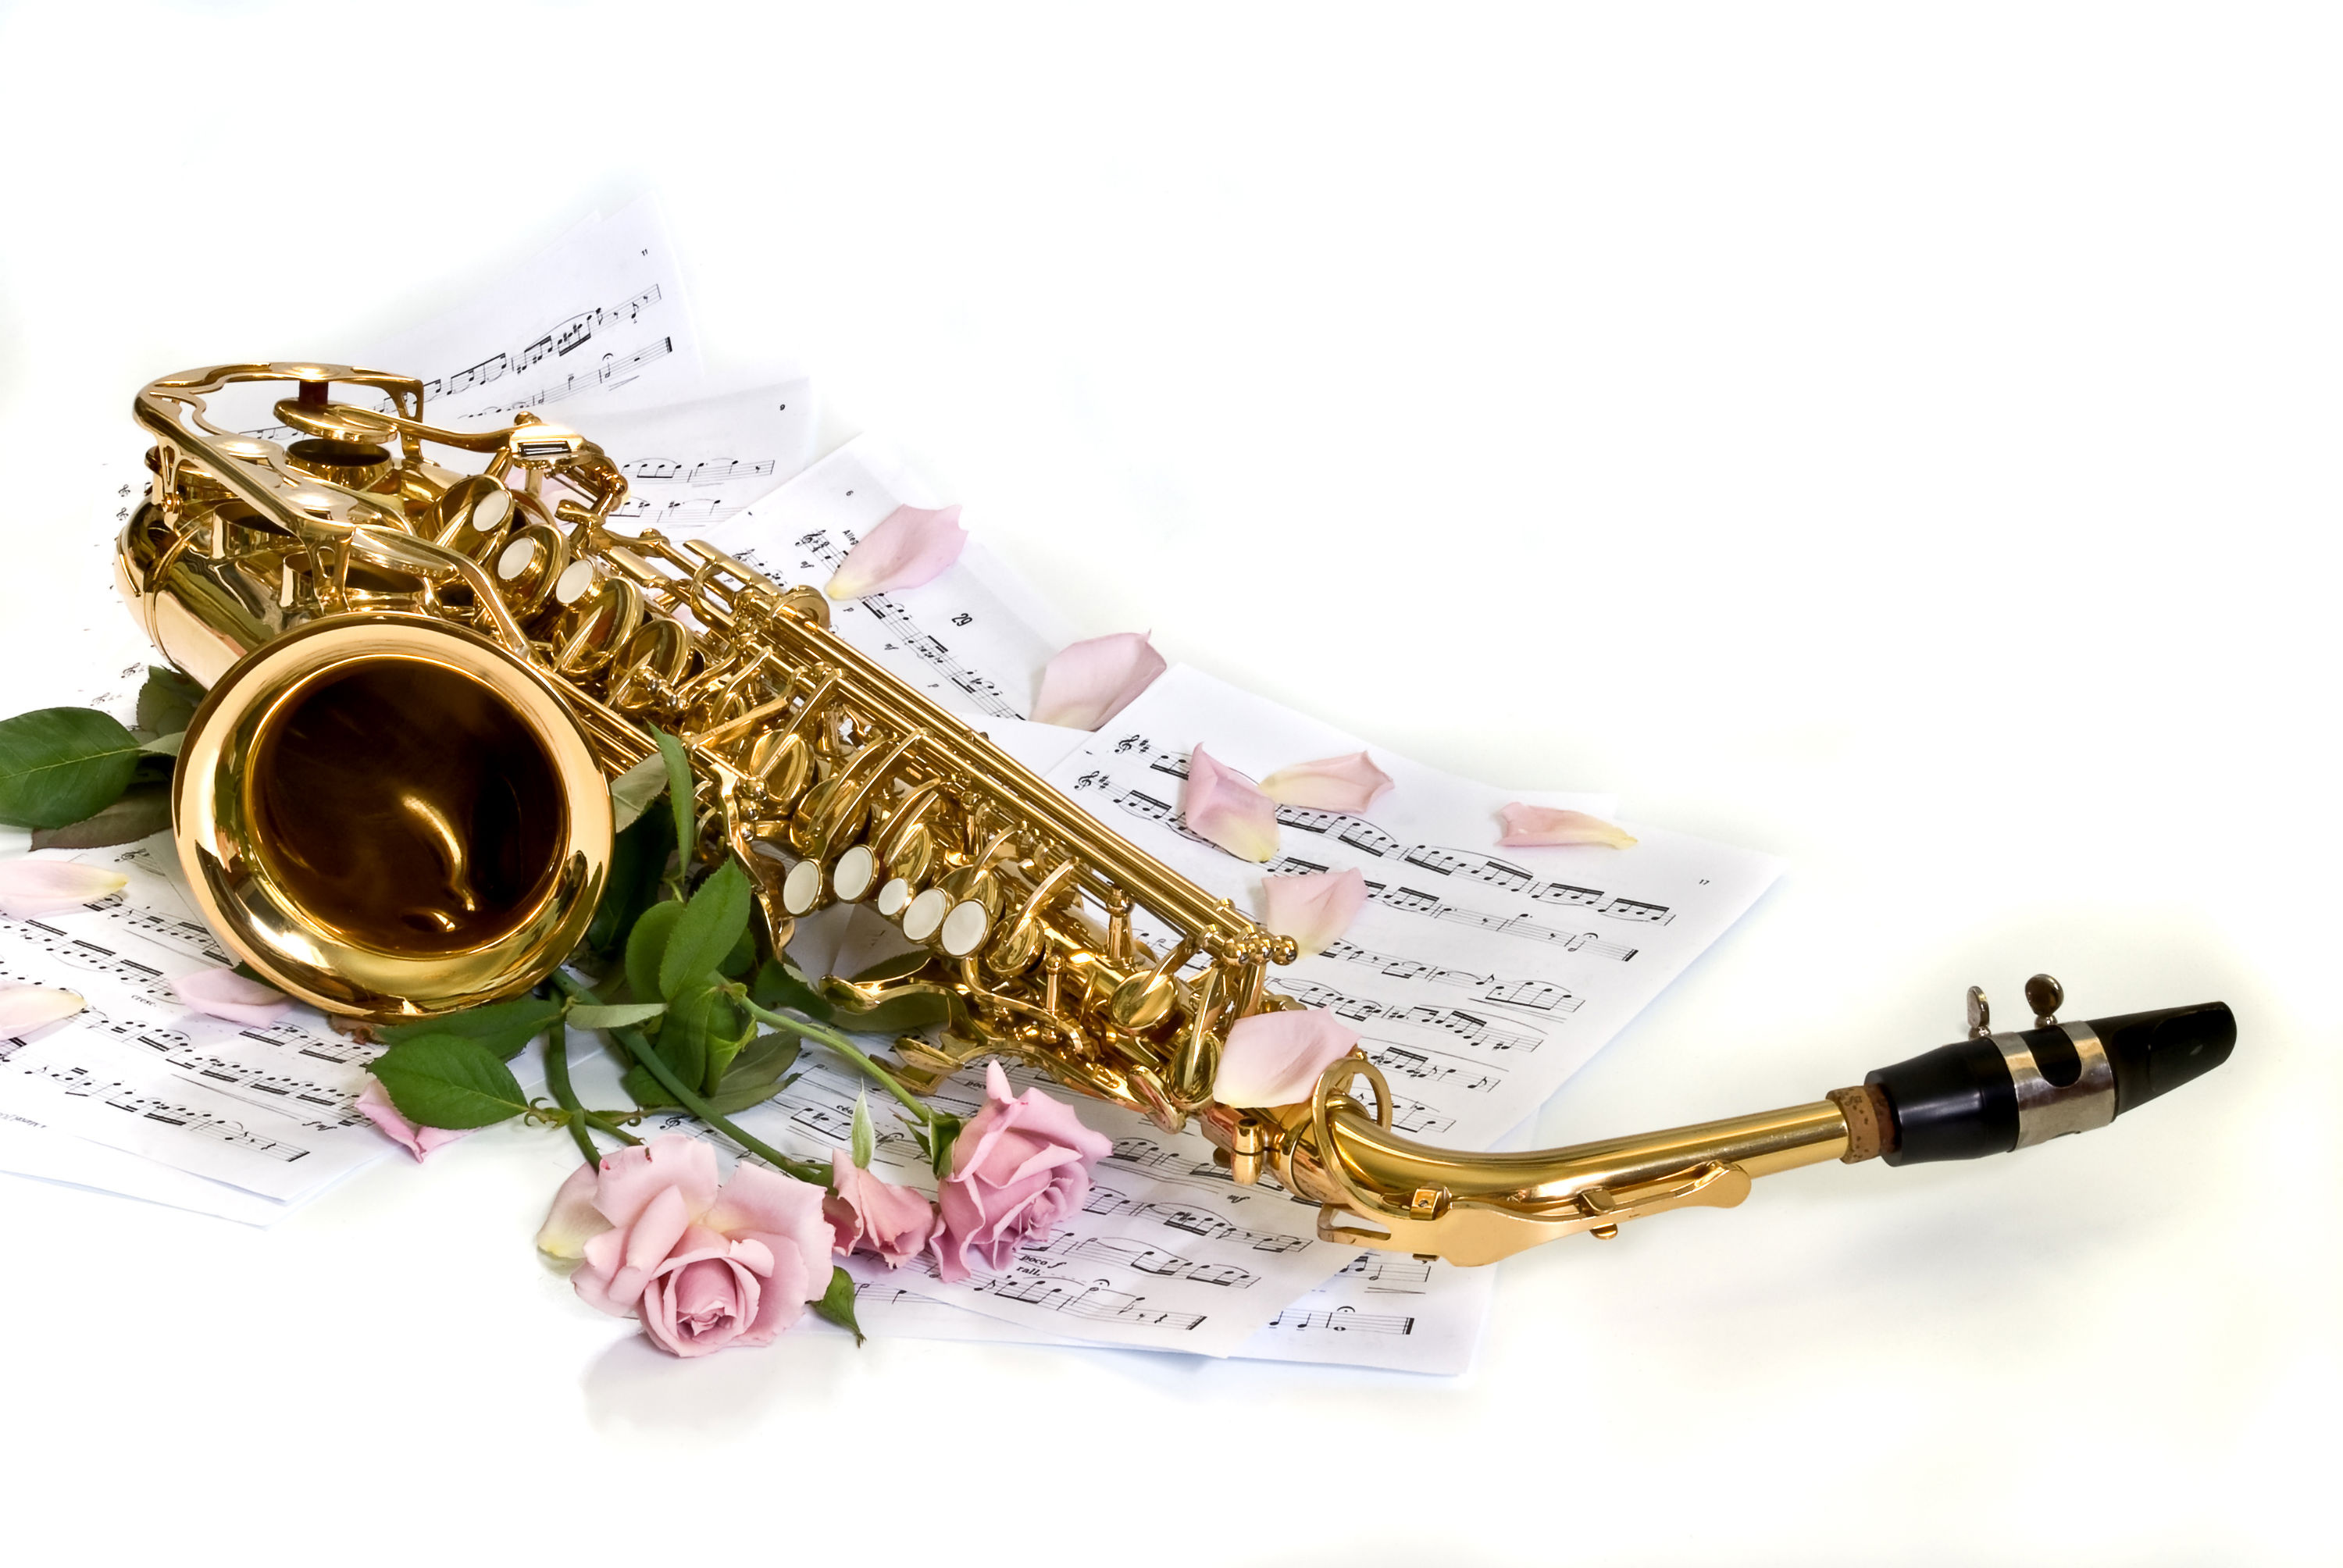 Saxophone: A musical wind instrument consisting of a brass tube and a mouthpiece with one reed. 3000x2010 HD Background.